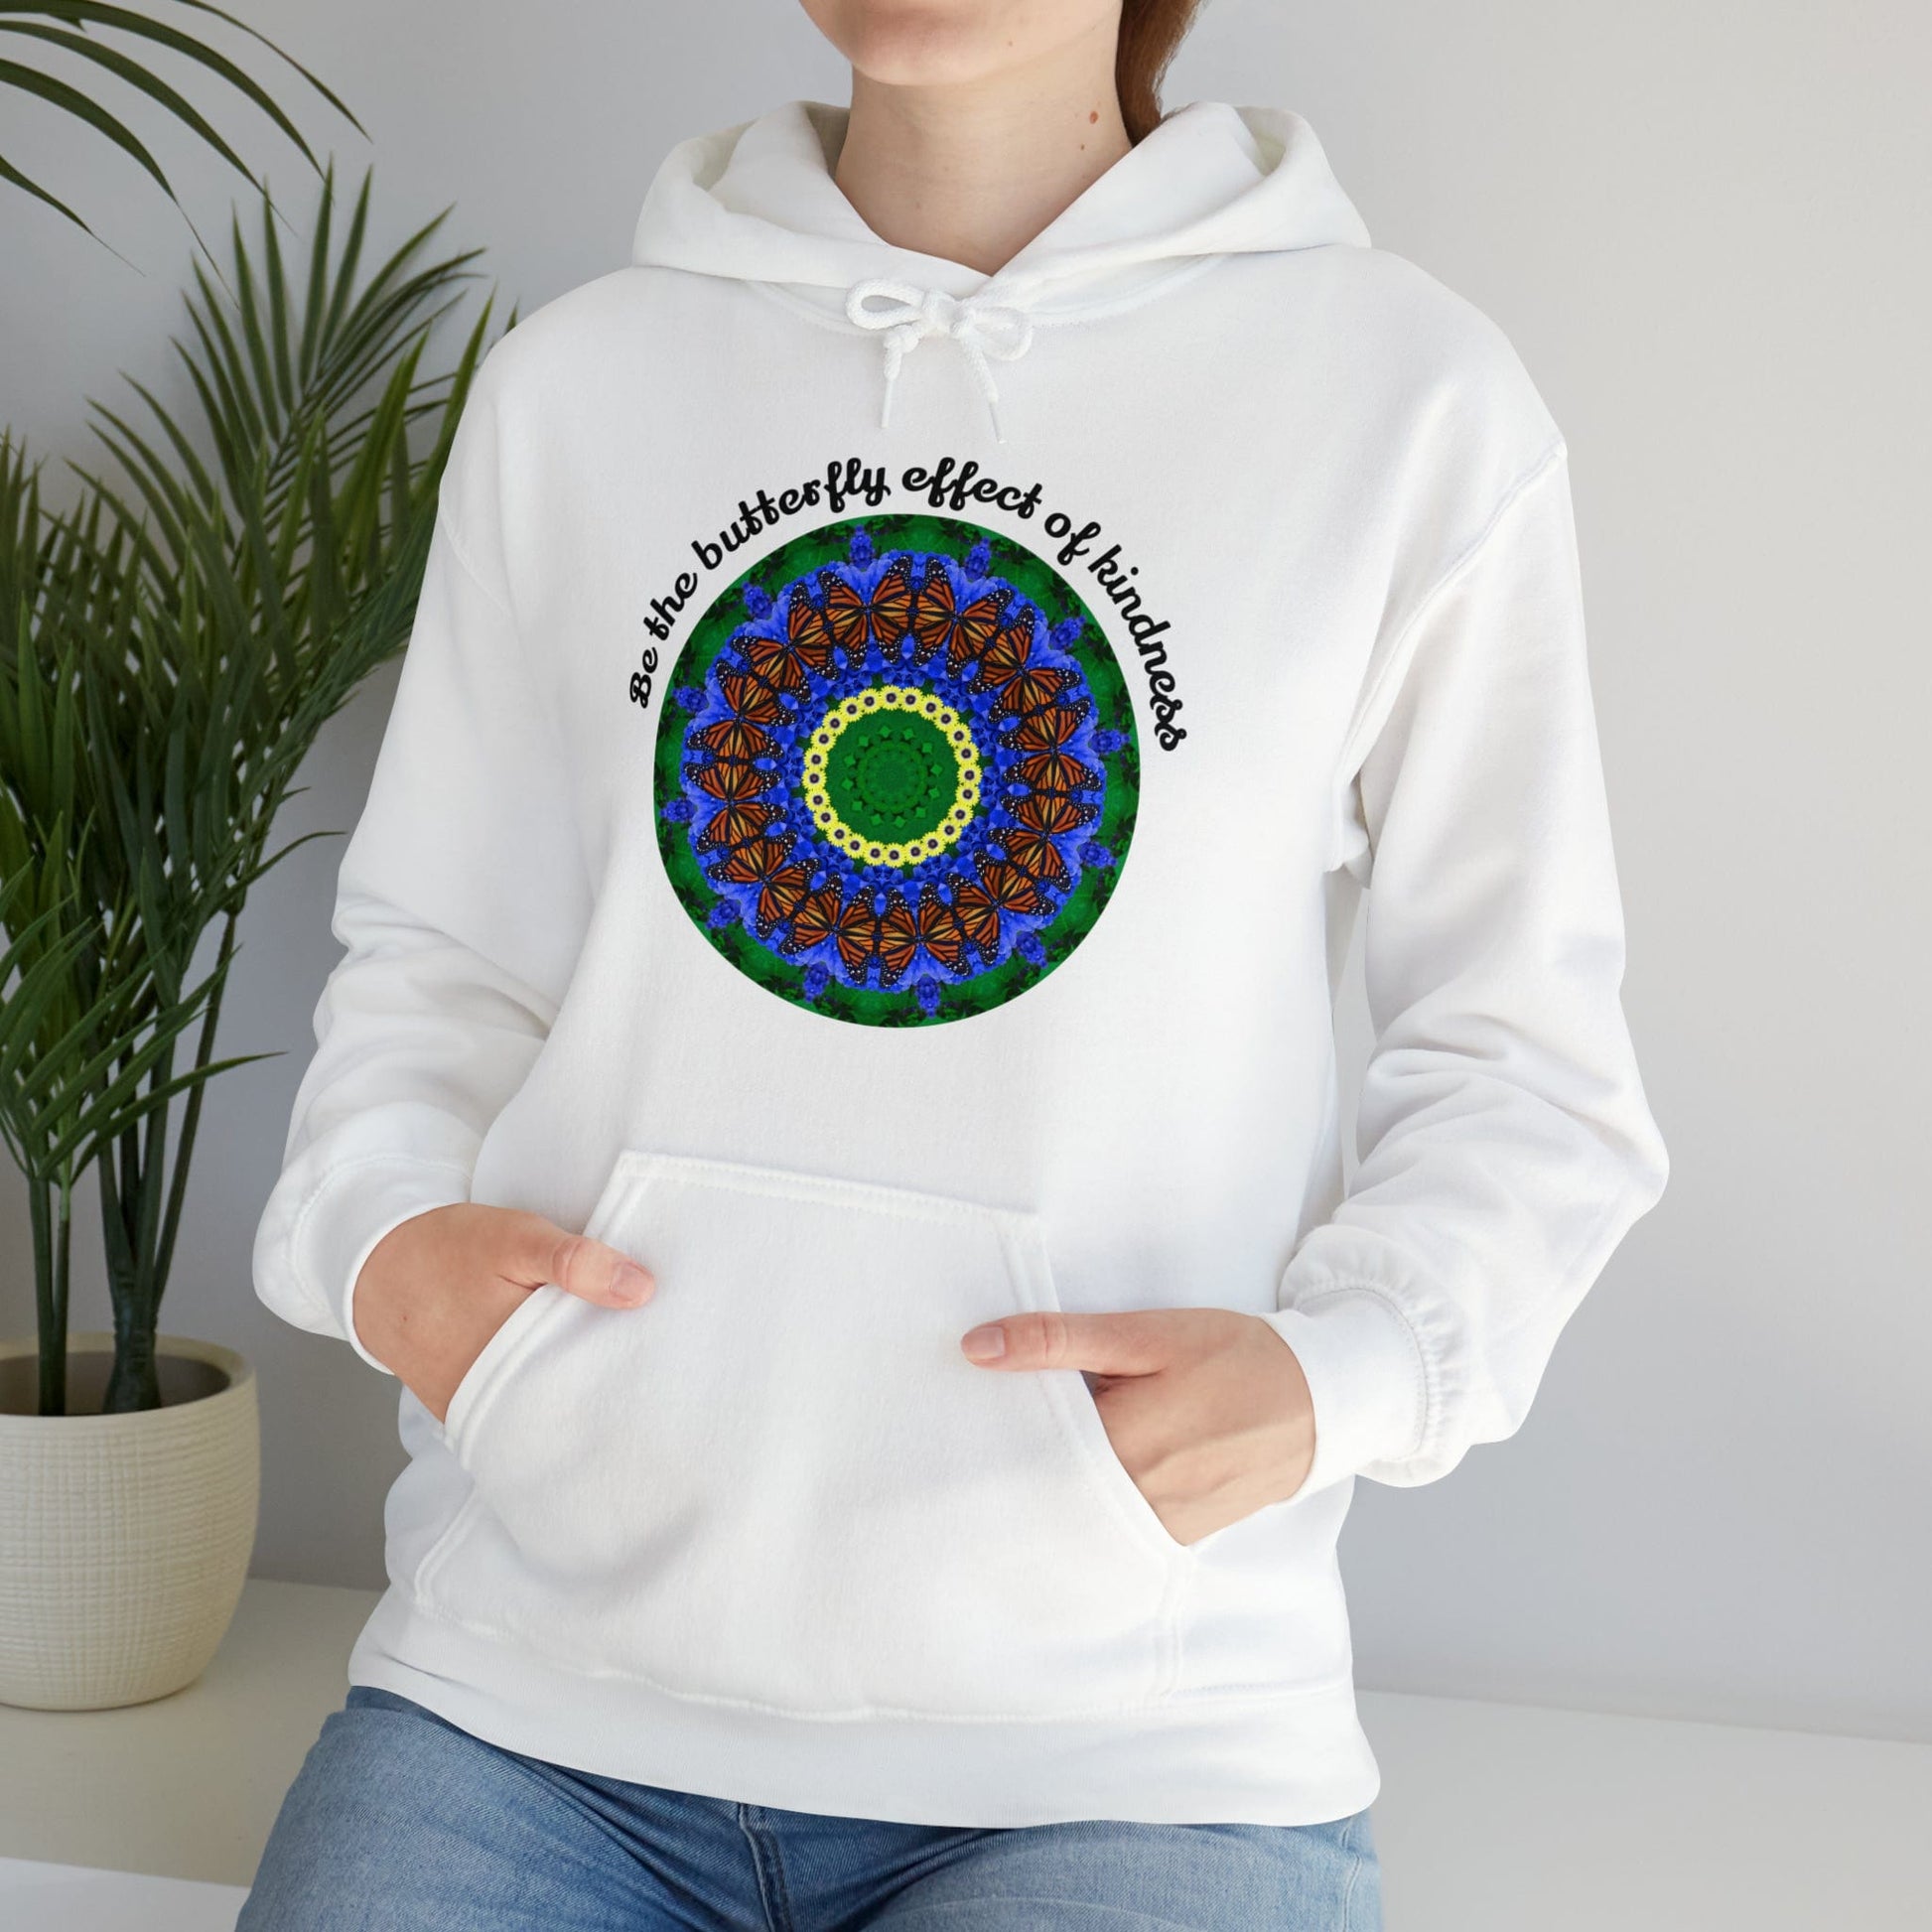 Pretty & Cute Butterfly Kindness Graphic Hoodie Sweatshirt - Monarch Butterfly Mandala Art - Be the butterfly effect of kindness white